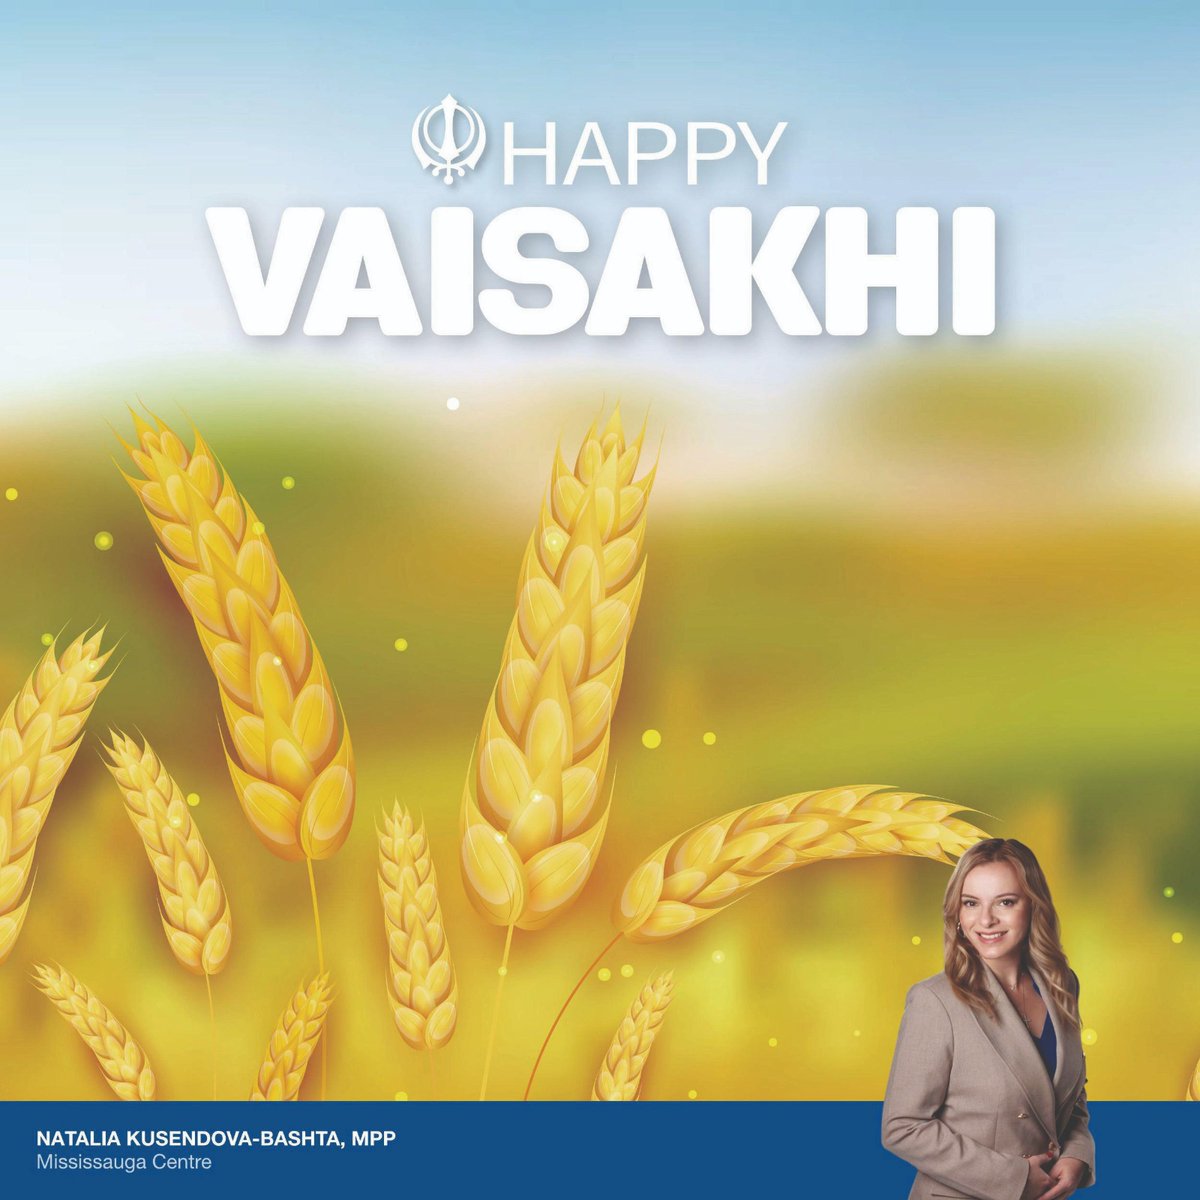 A Happy Vaisakhi to Sikhs in Mississauga and across Ontario, as you come together to celebrate the New Year! I wish you a peaceful and joyous holiday! Vaisakhi diyan lakh lakh vadhaiyan!